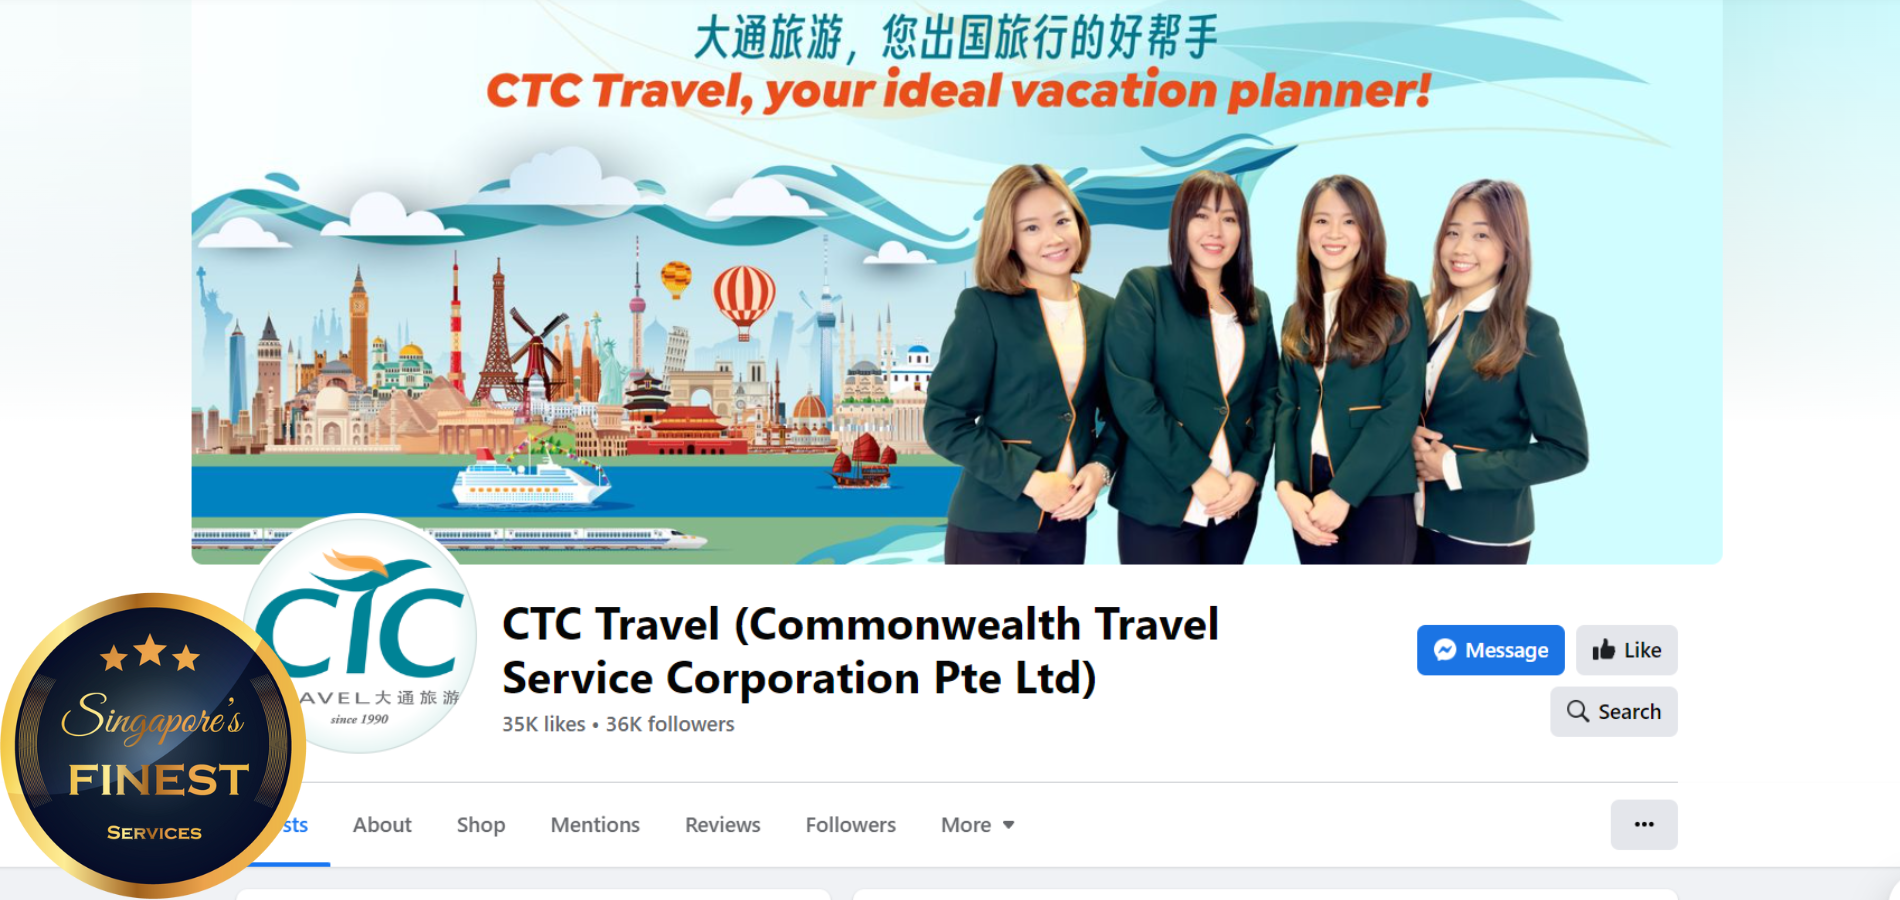 The Finest Travel Agencies in Singapore